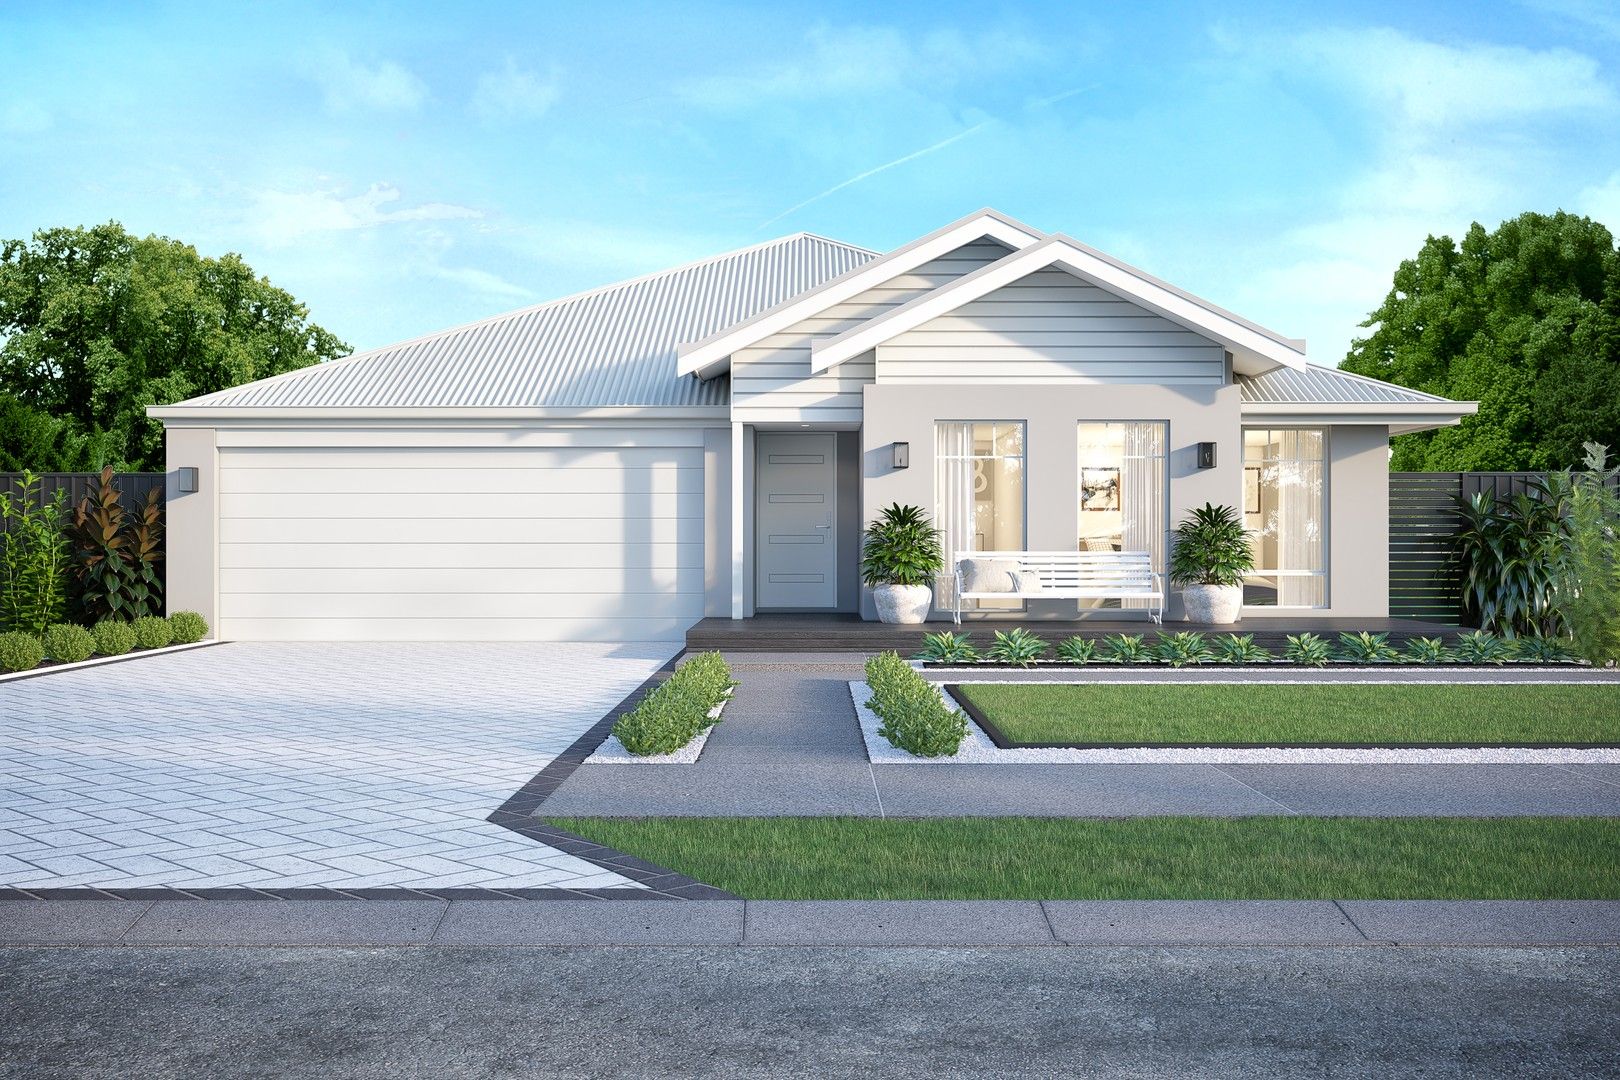 4 bedrooms New House & Land in Lot 133 Rapallo Grove MADORA BAY WA, 6210